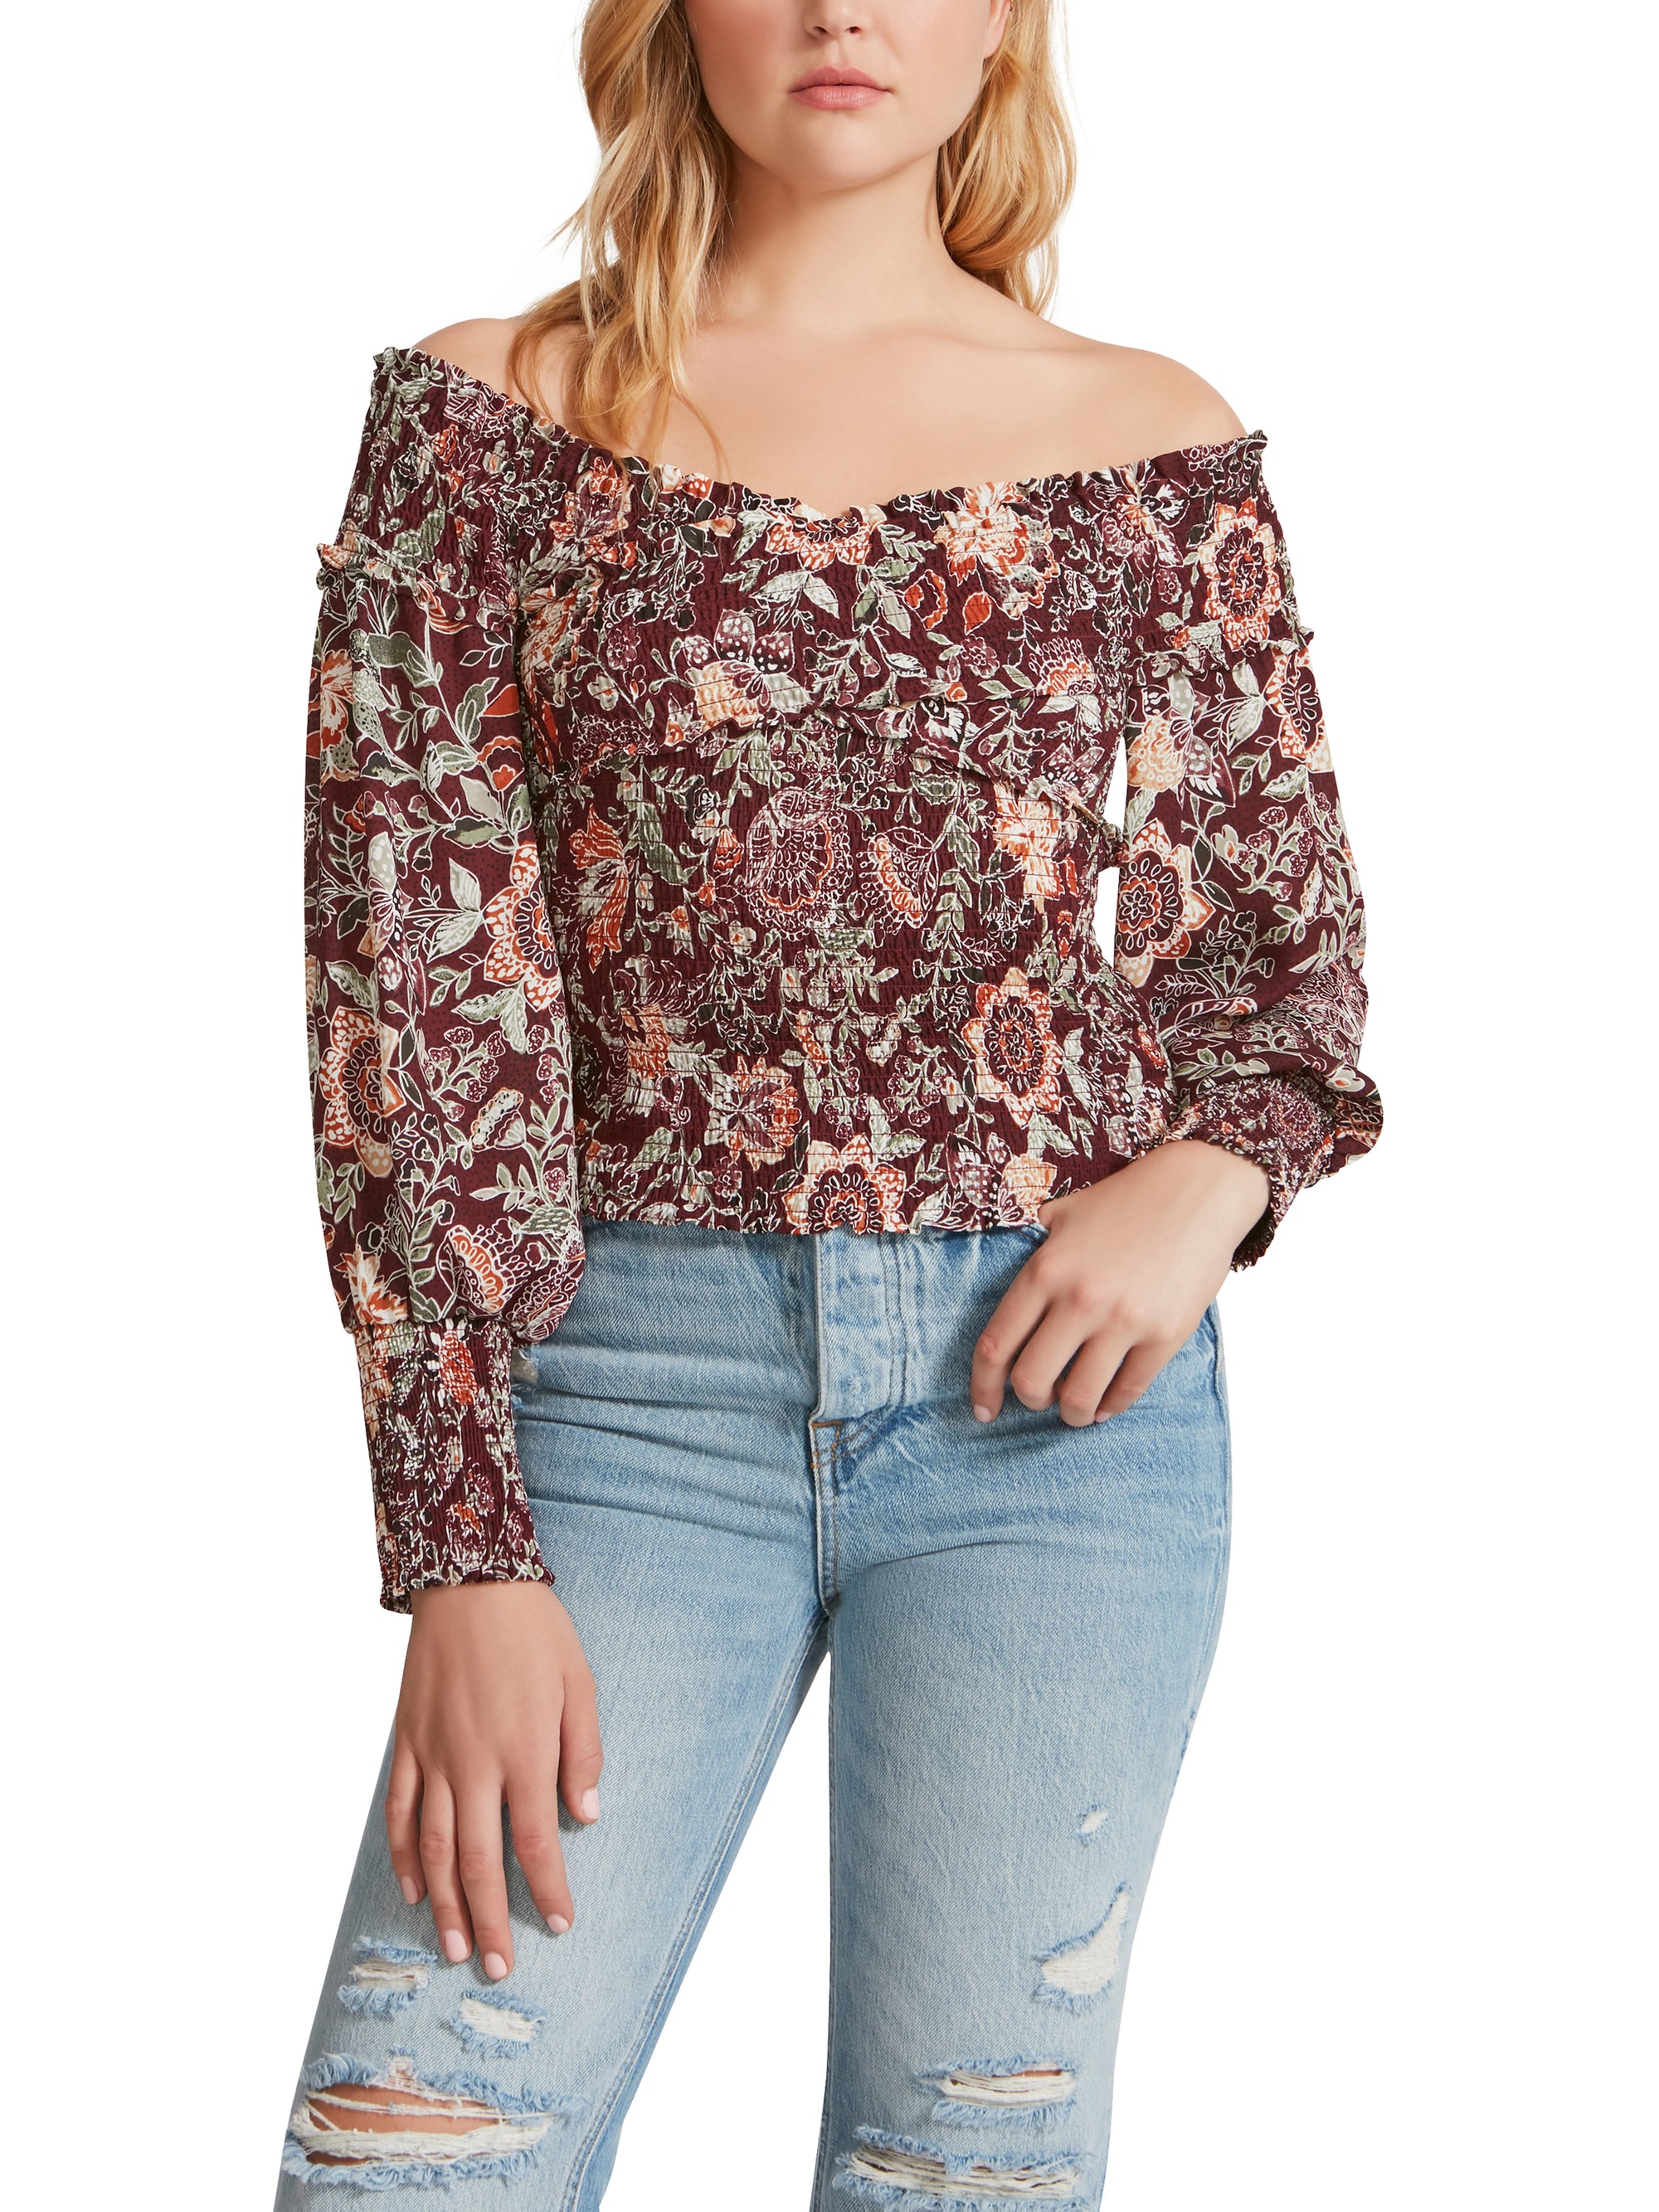 Helena Floral Top